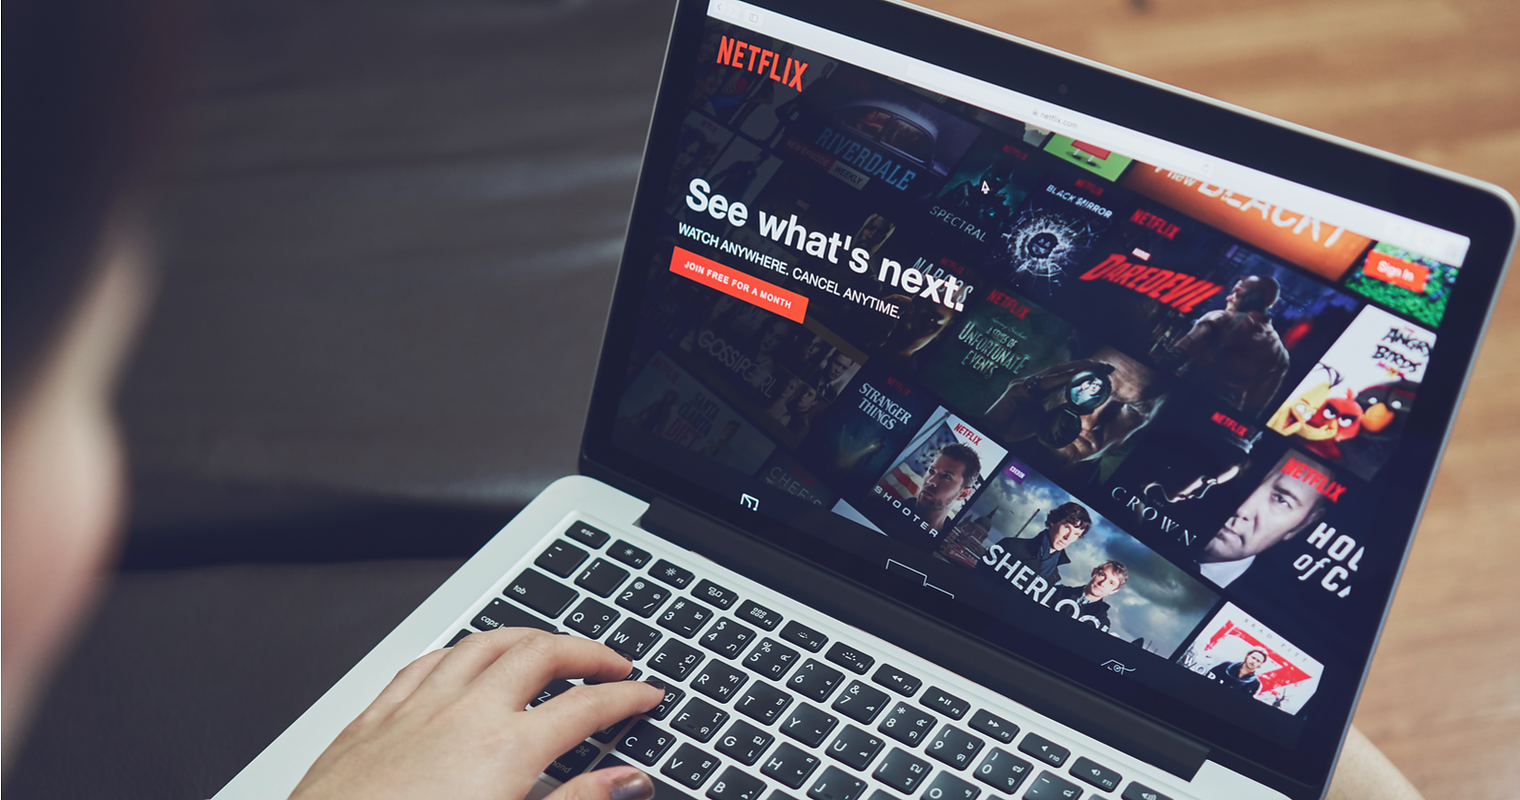 5 Lessons from Netflix on How to Be Successful with Content Marketing